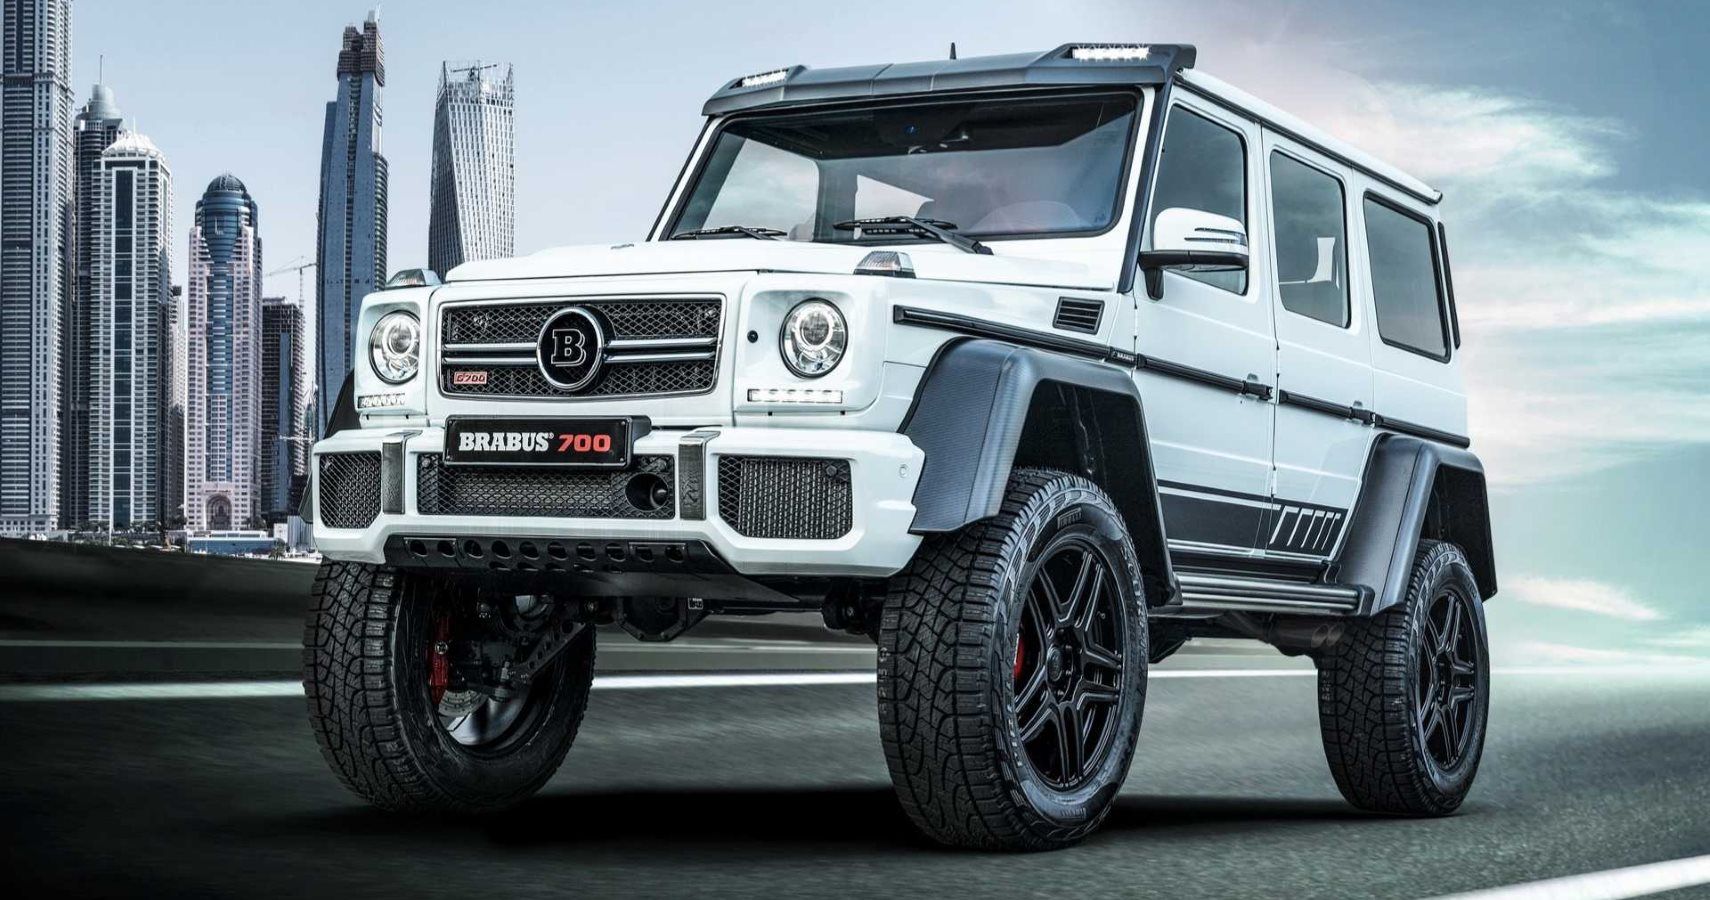 Brabus Revamps Last-Gen AMG G64 With 700 4X4 Squared